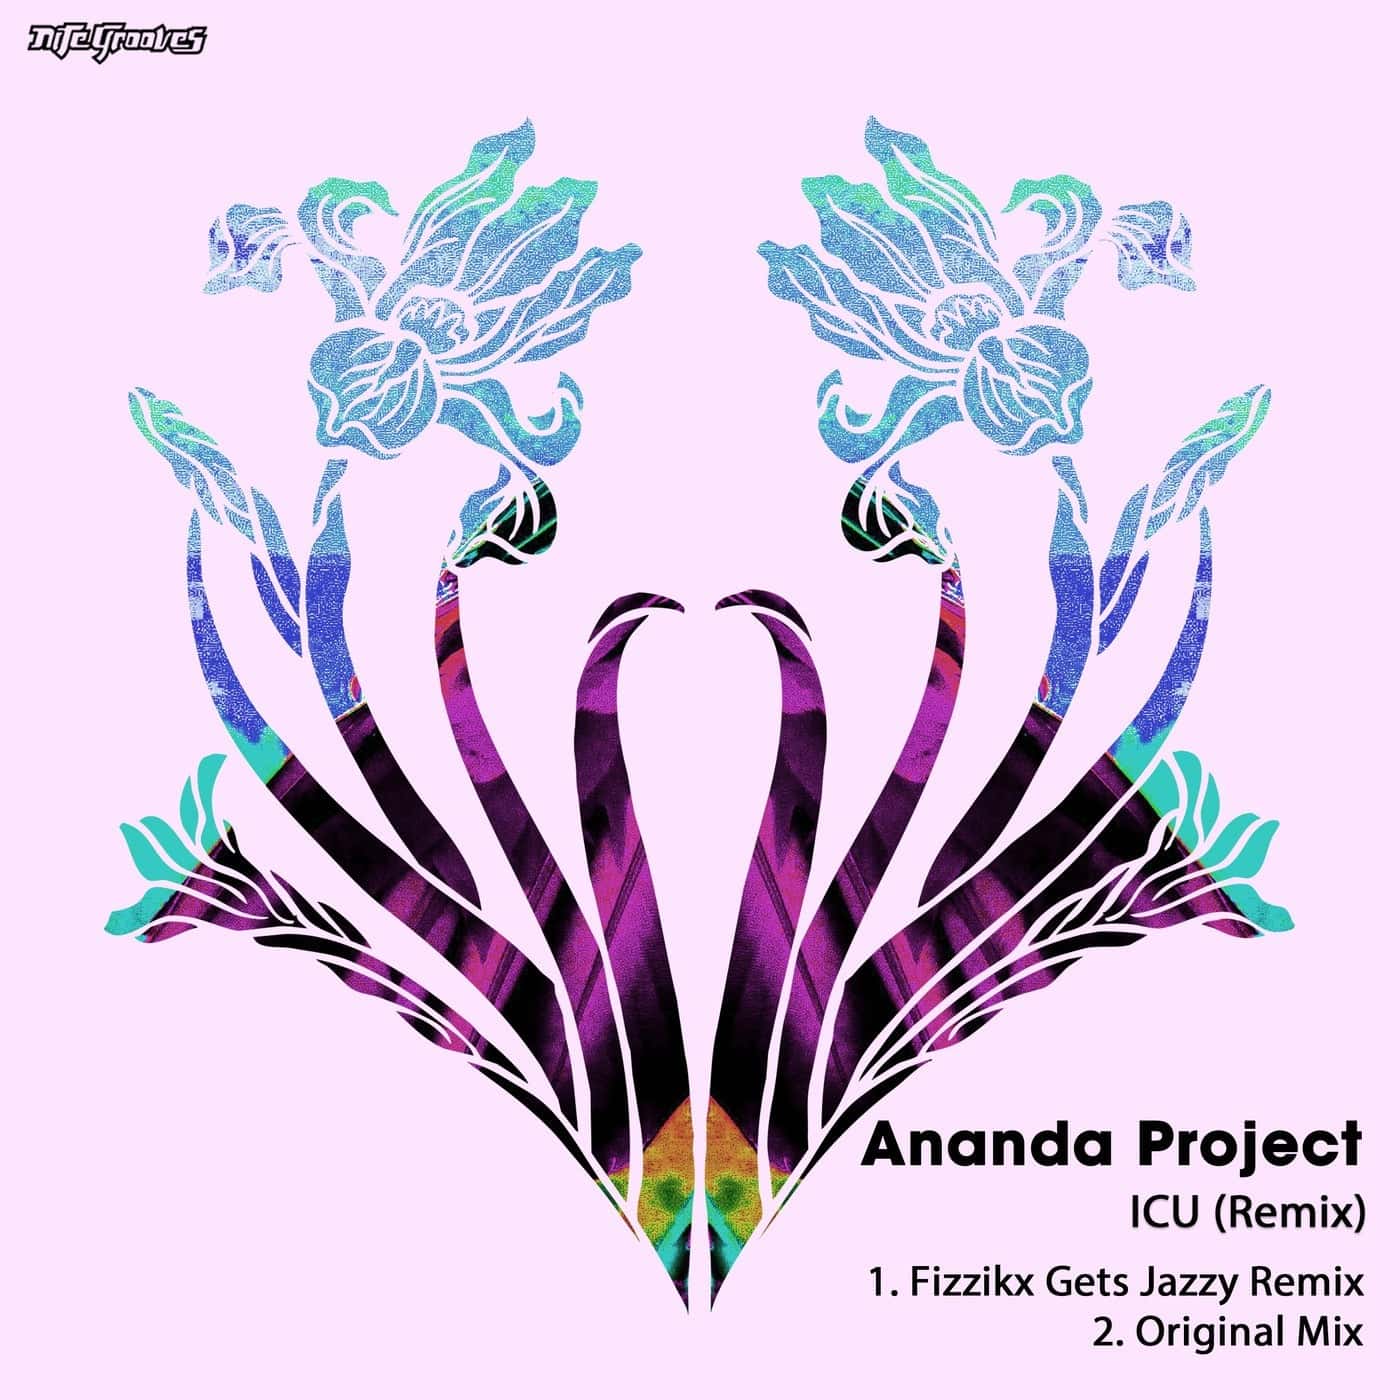 image cover: Ananda Project - ICU (Remix) [KNG913] / Nite Grooves